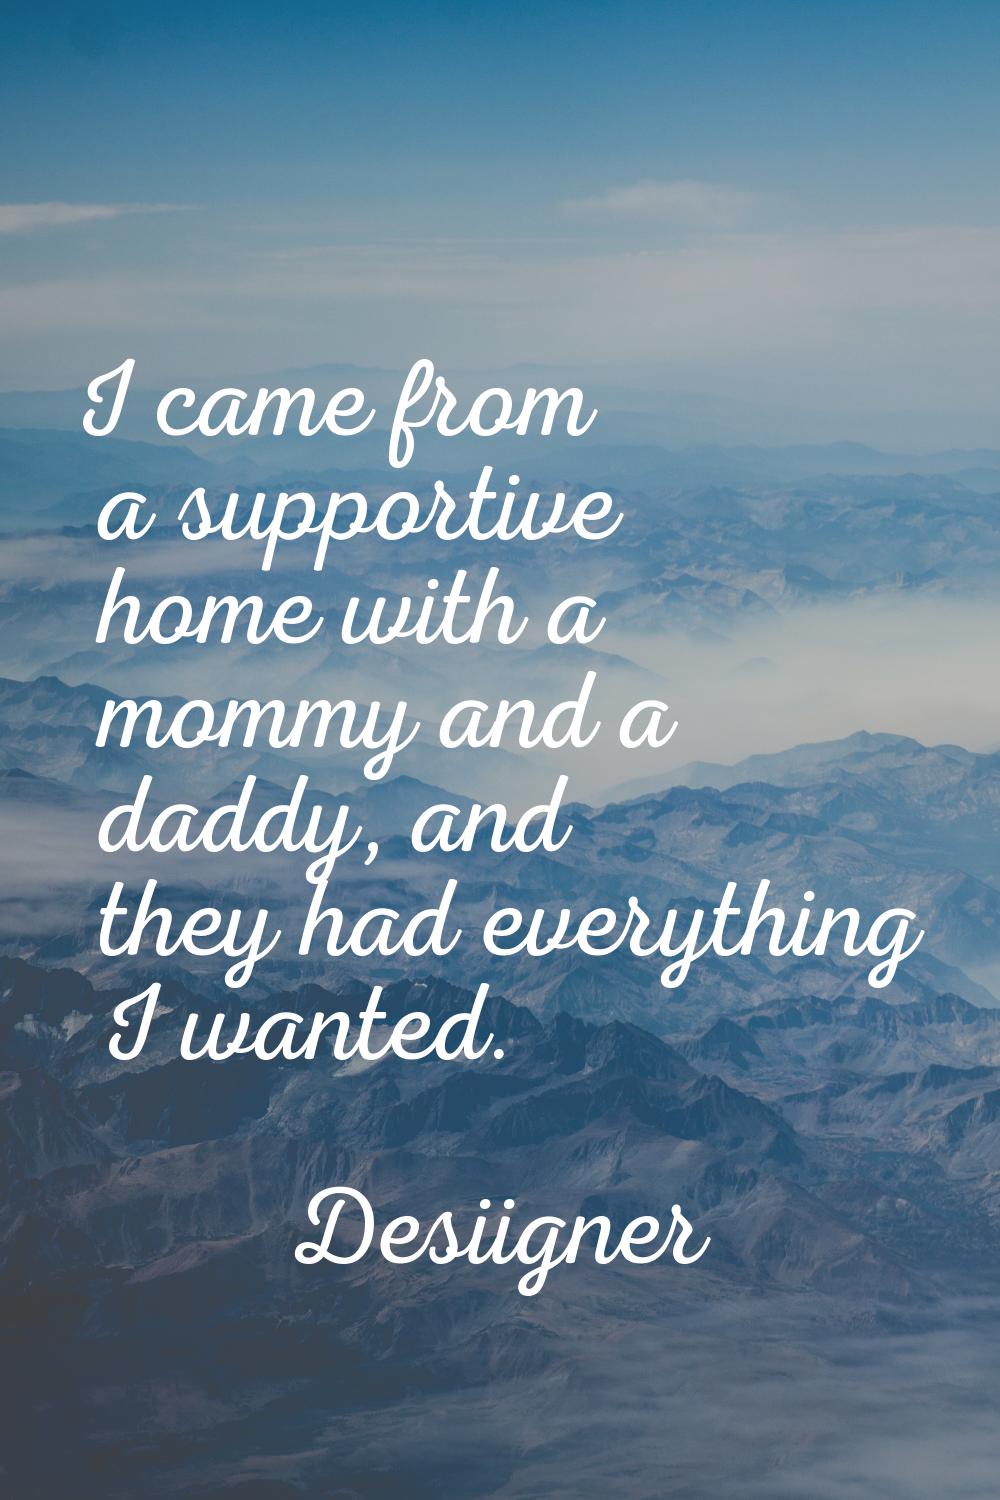 I came from a supportive home with a mommy and a daddy, and they had everything I wanted.